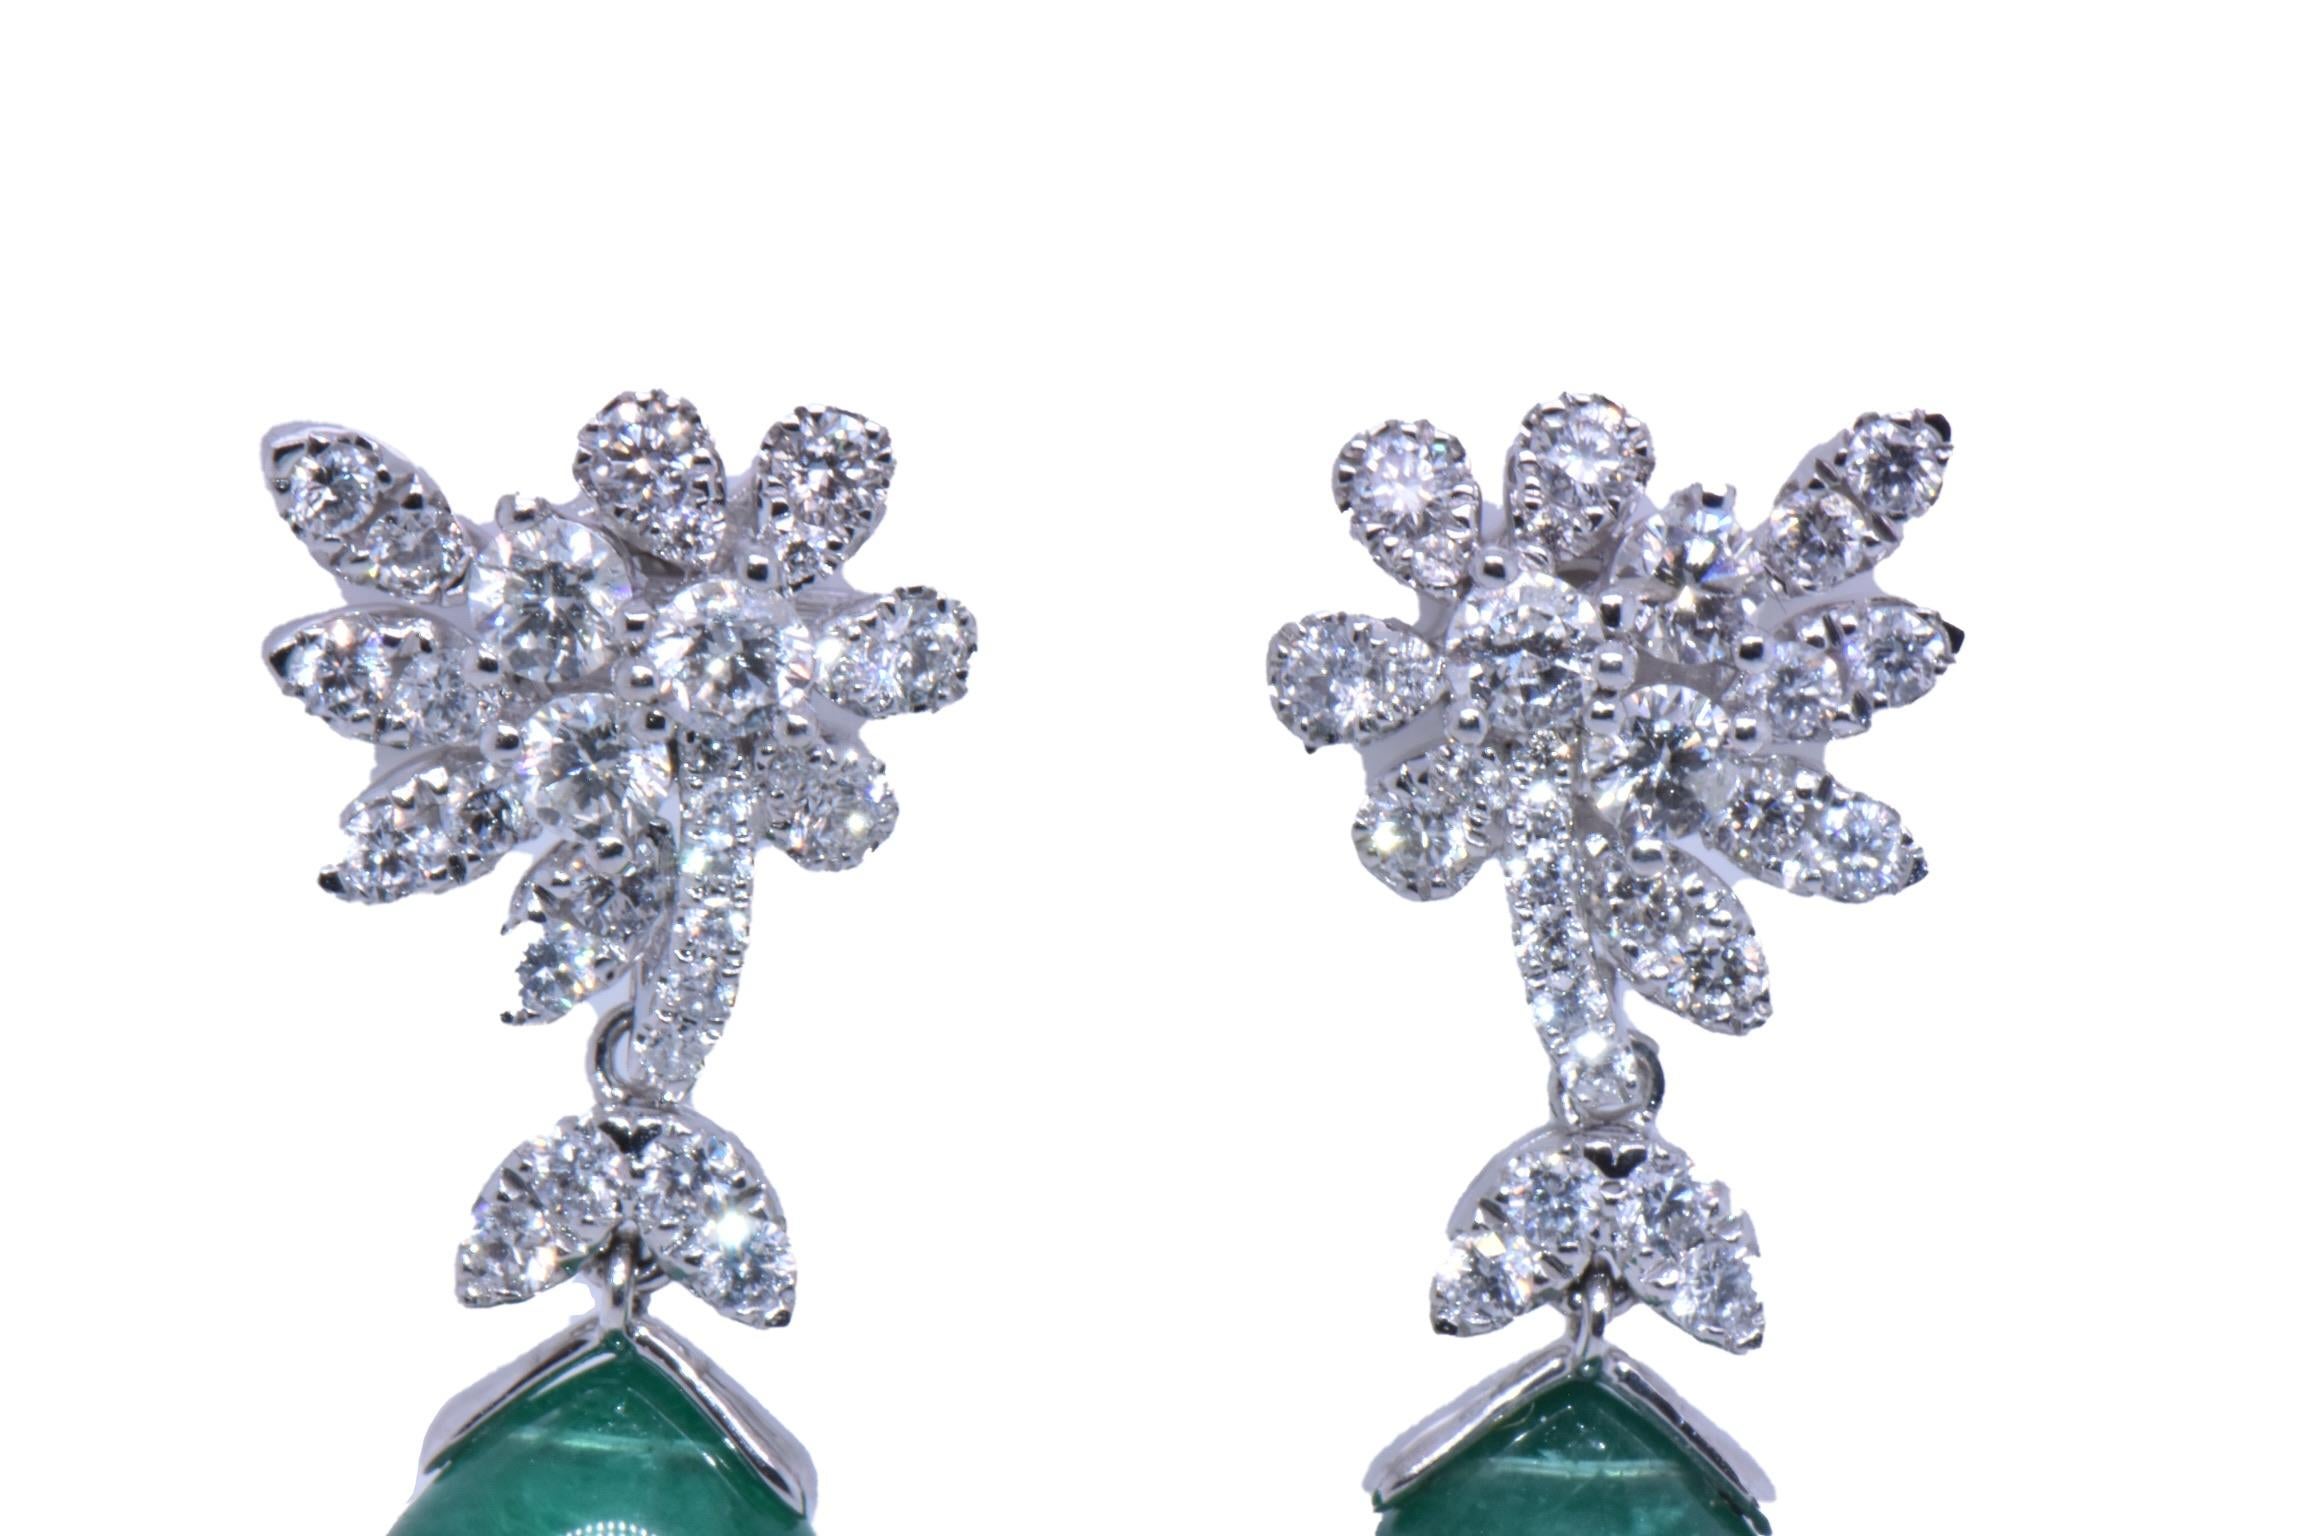 Cabochon 47.41 Carat Emerald Drop Earrings with Diamond Flower Design in 18k White Gold For Sale